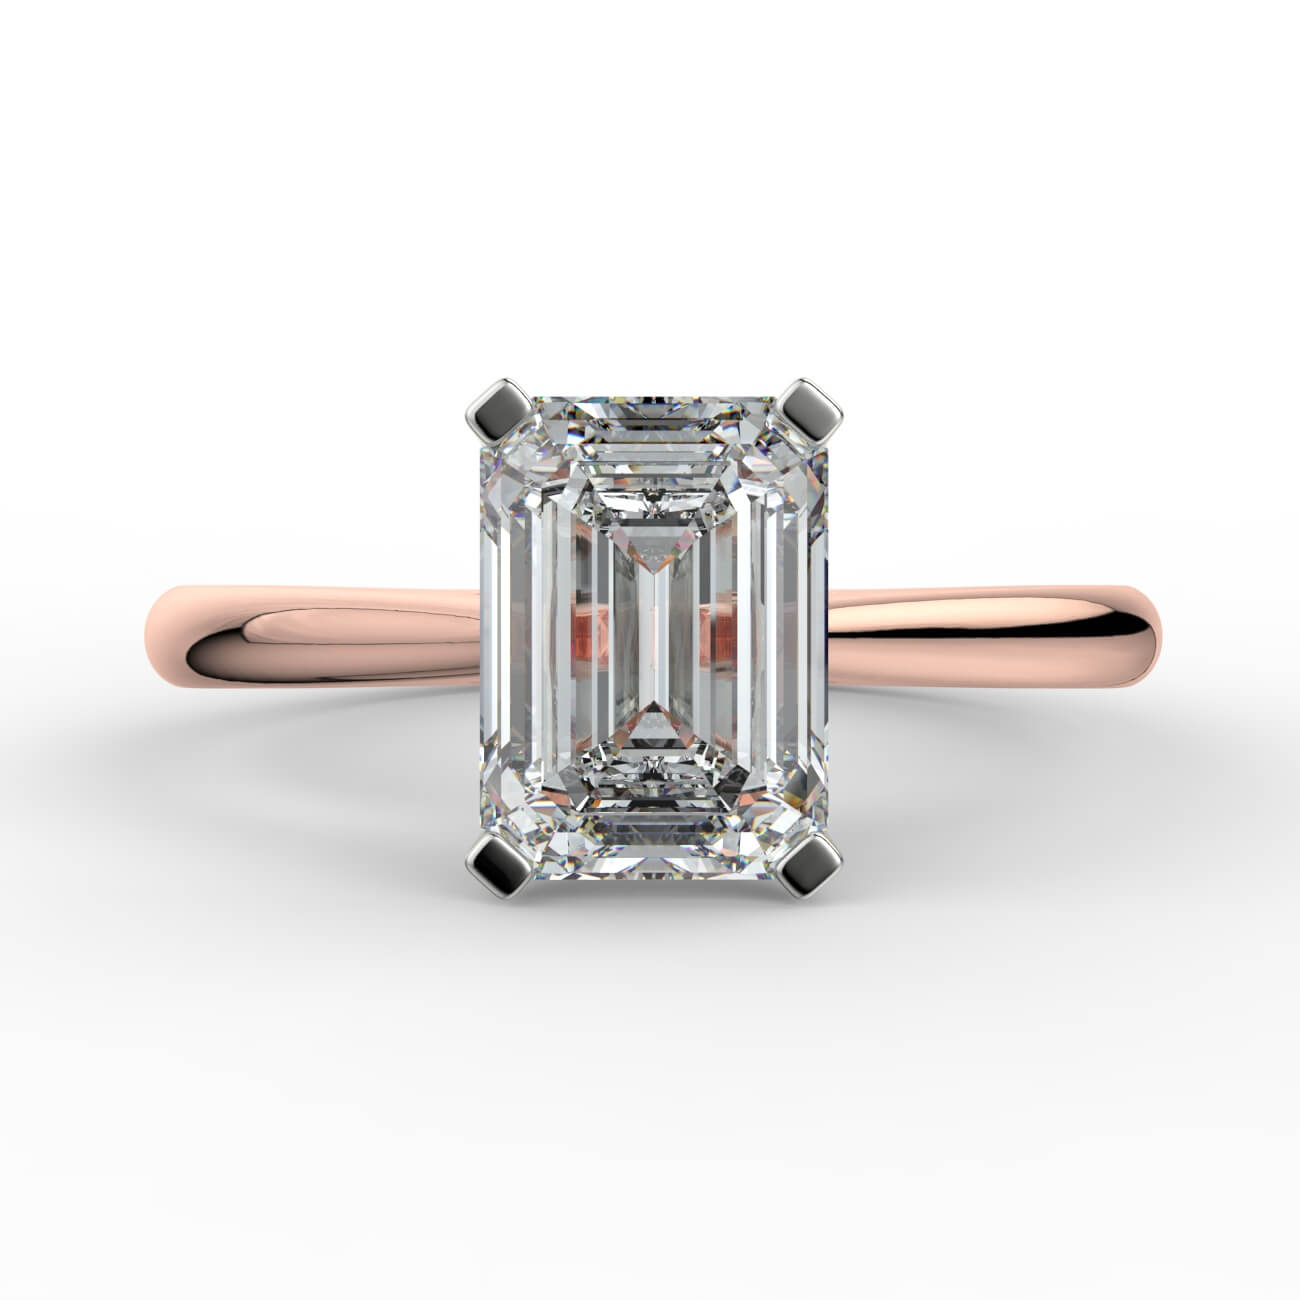 Emerald cut diamond cathedral engagement ring in rose and white gold – Australian Diamond Network